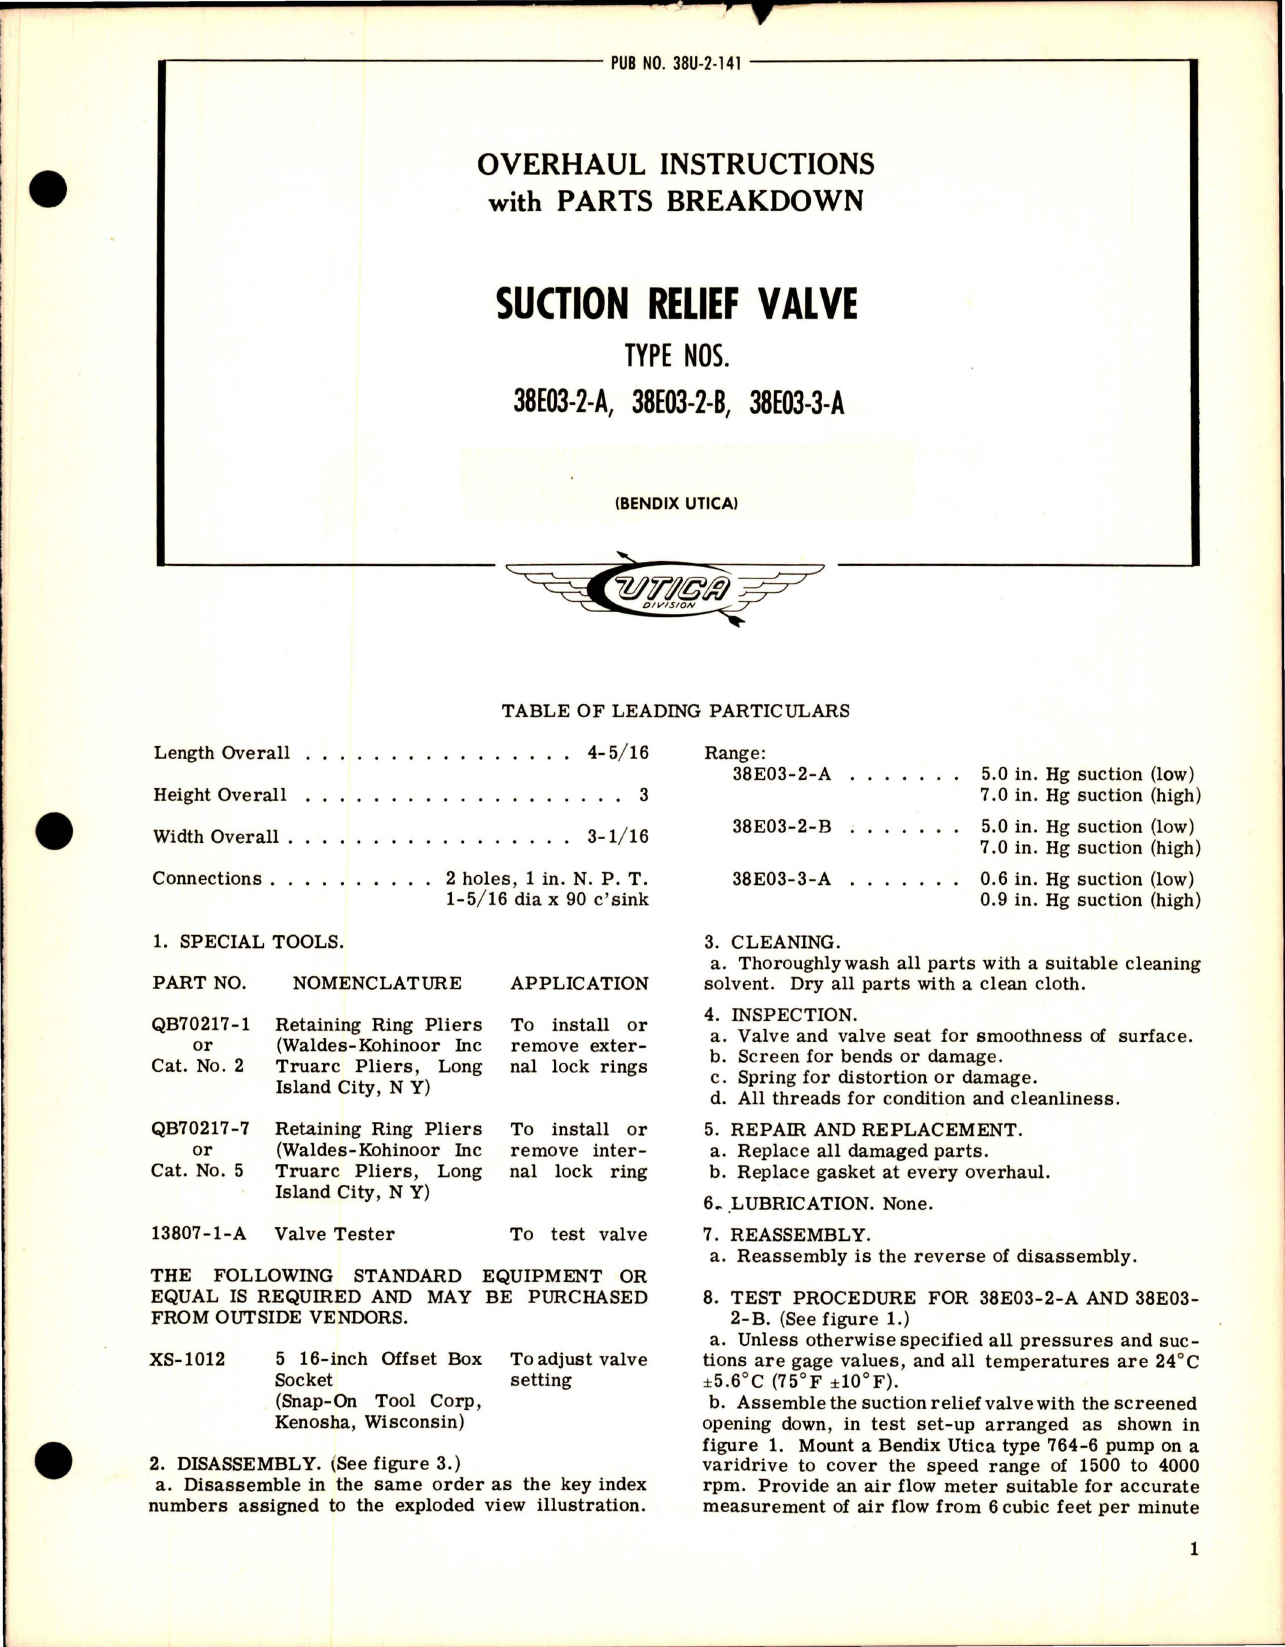 Sample page 1 from AirCorps Library document: Overhaul Instructions w Parts for Suction Relief Valve 